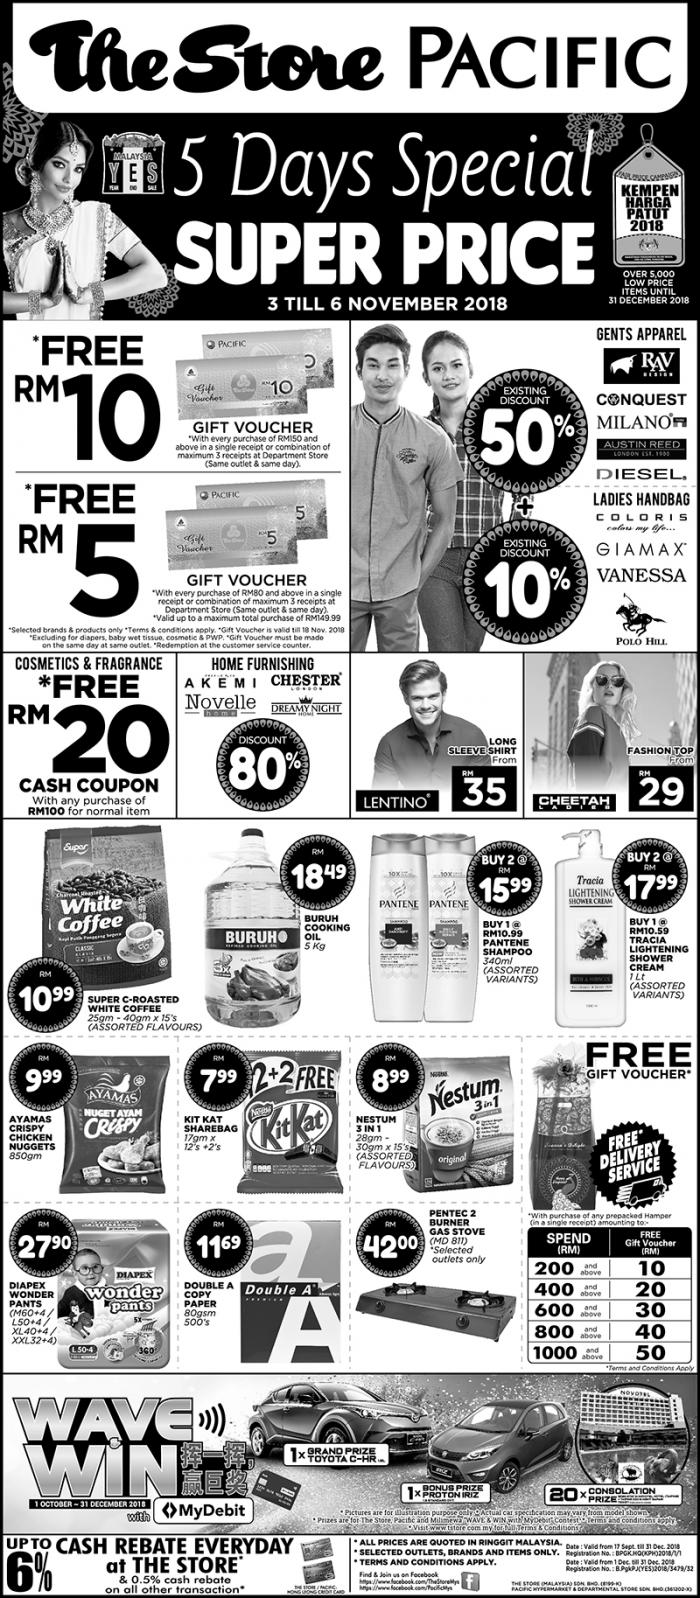 The Store and Pacific Hypermarket Super Price Promotion (3 November 2018 - 6 November 2018)